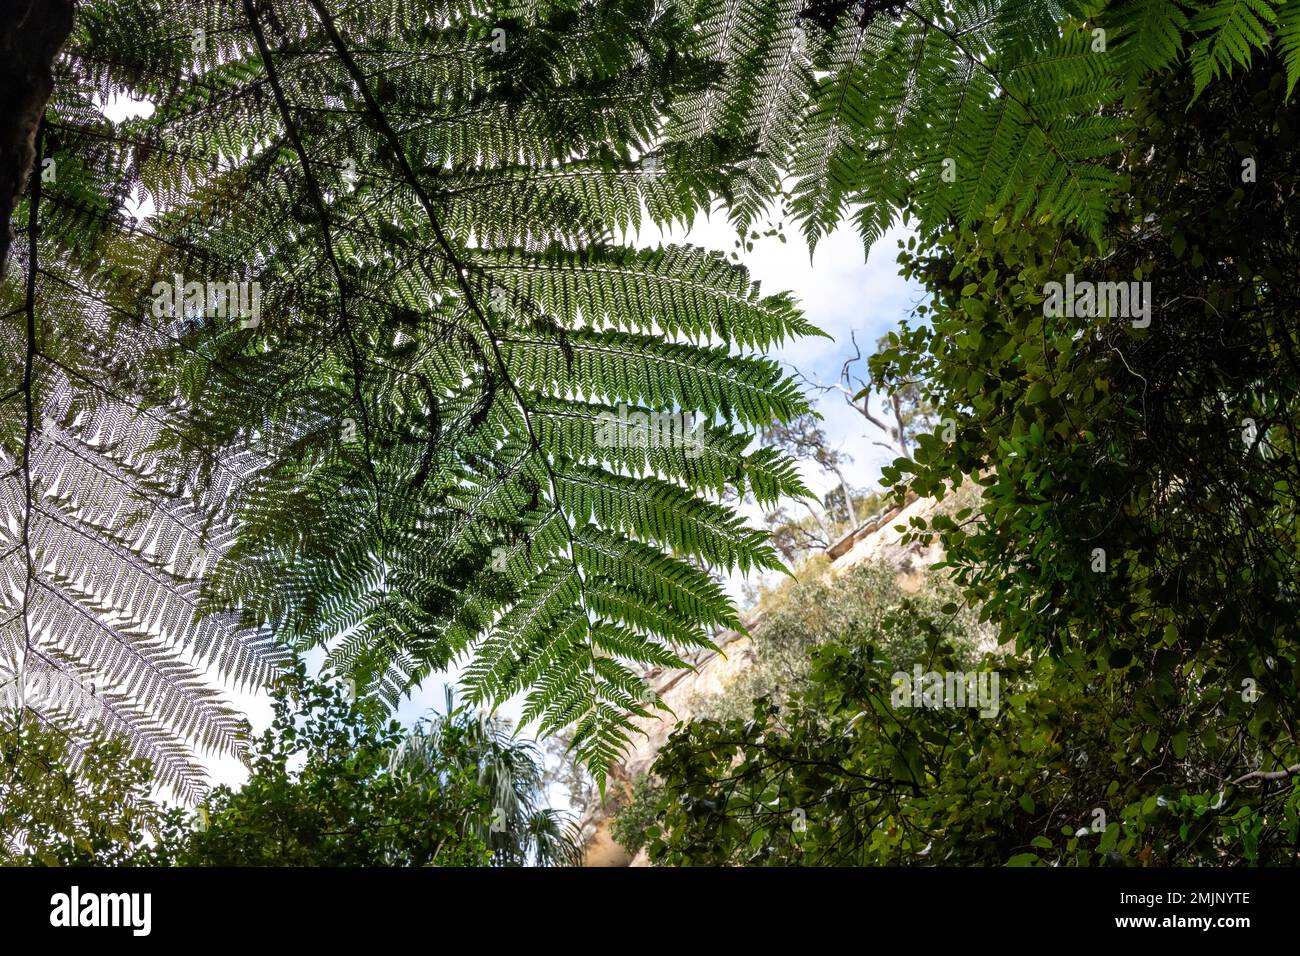 Beautiful pattern from a Cyathea cooperi (Australian Tree Fern). A fast-growing tree fern with long spreading frond at Carnarvon Gorge. Stock Photo